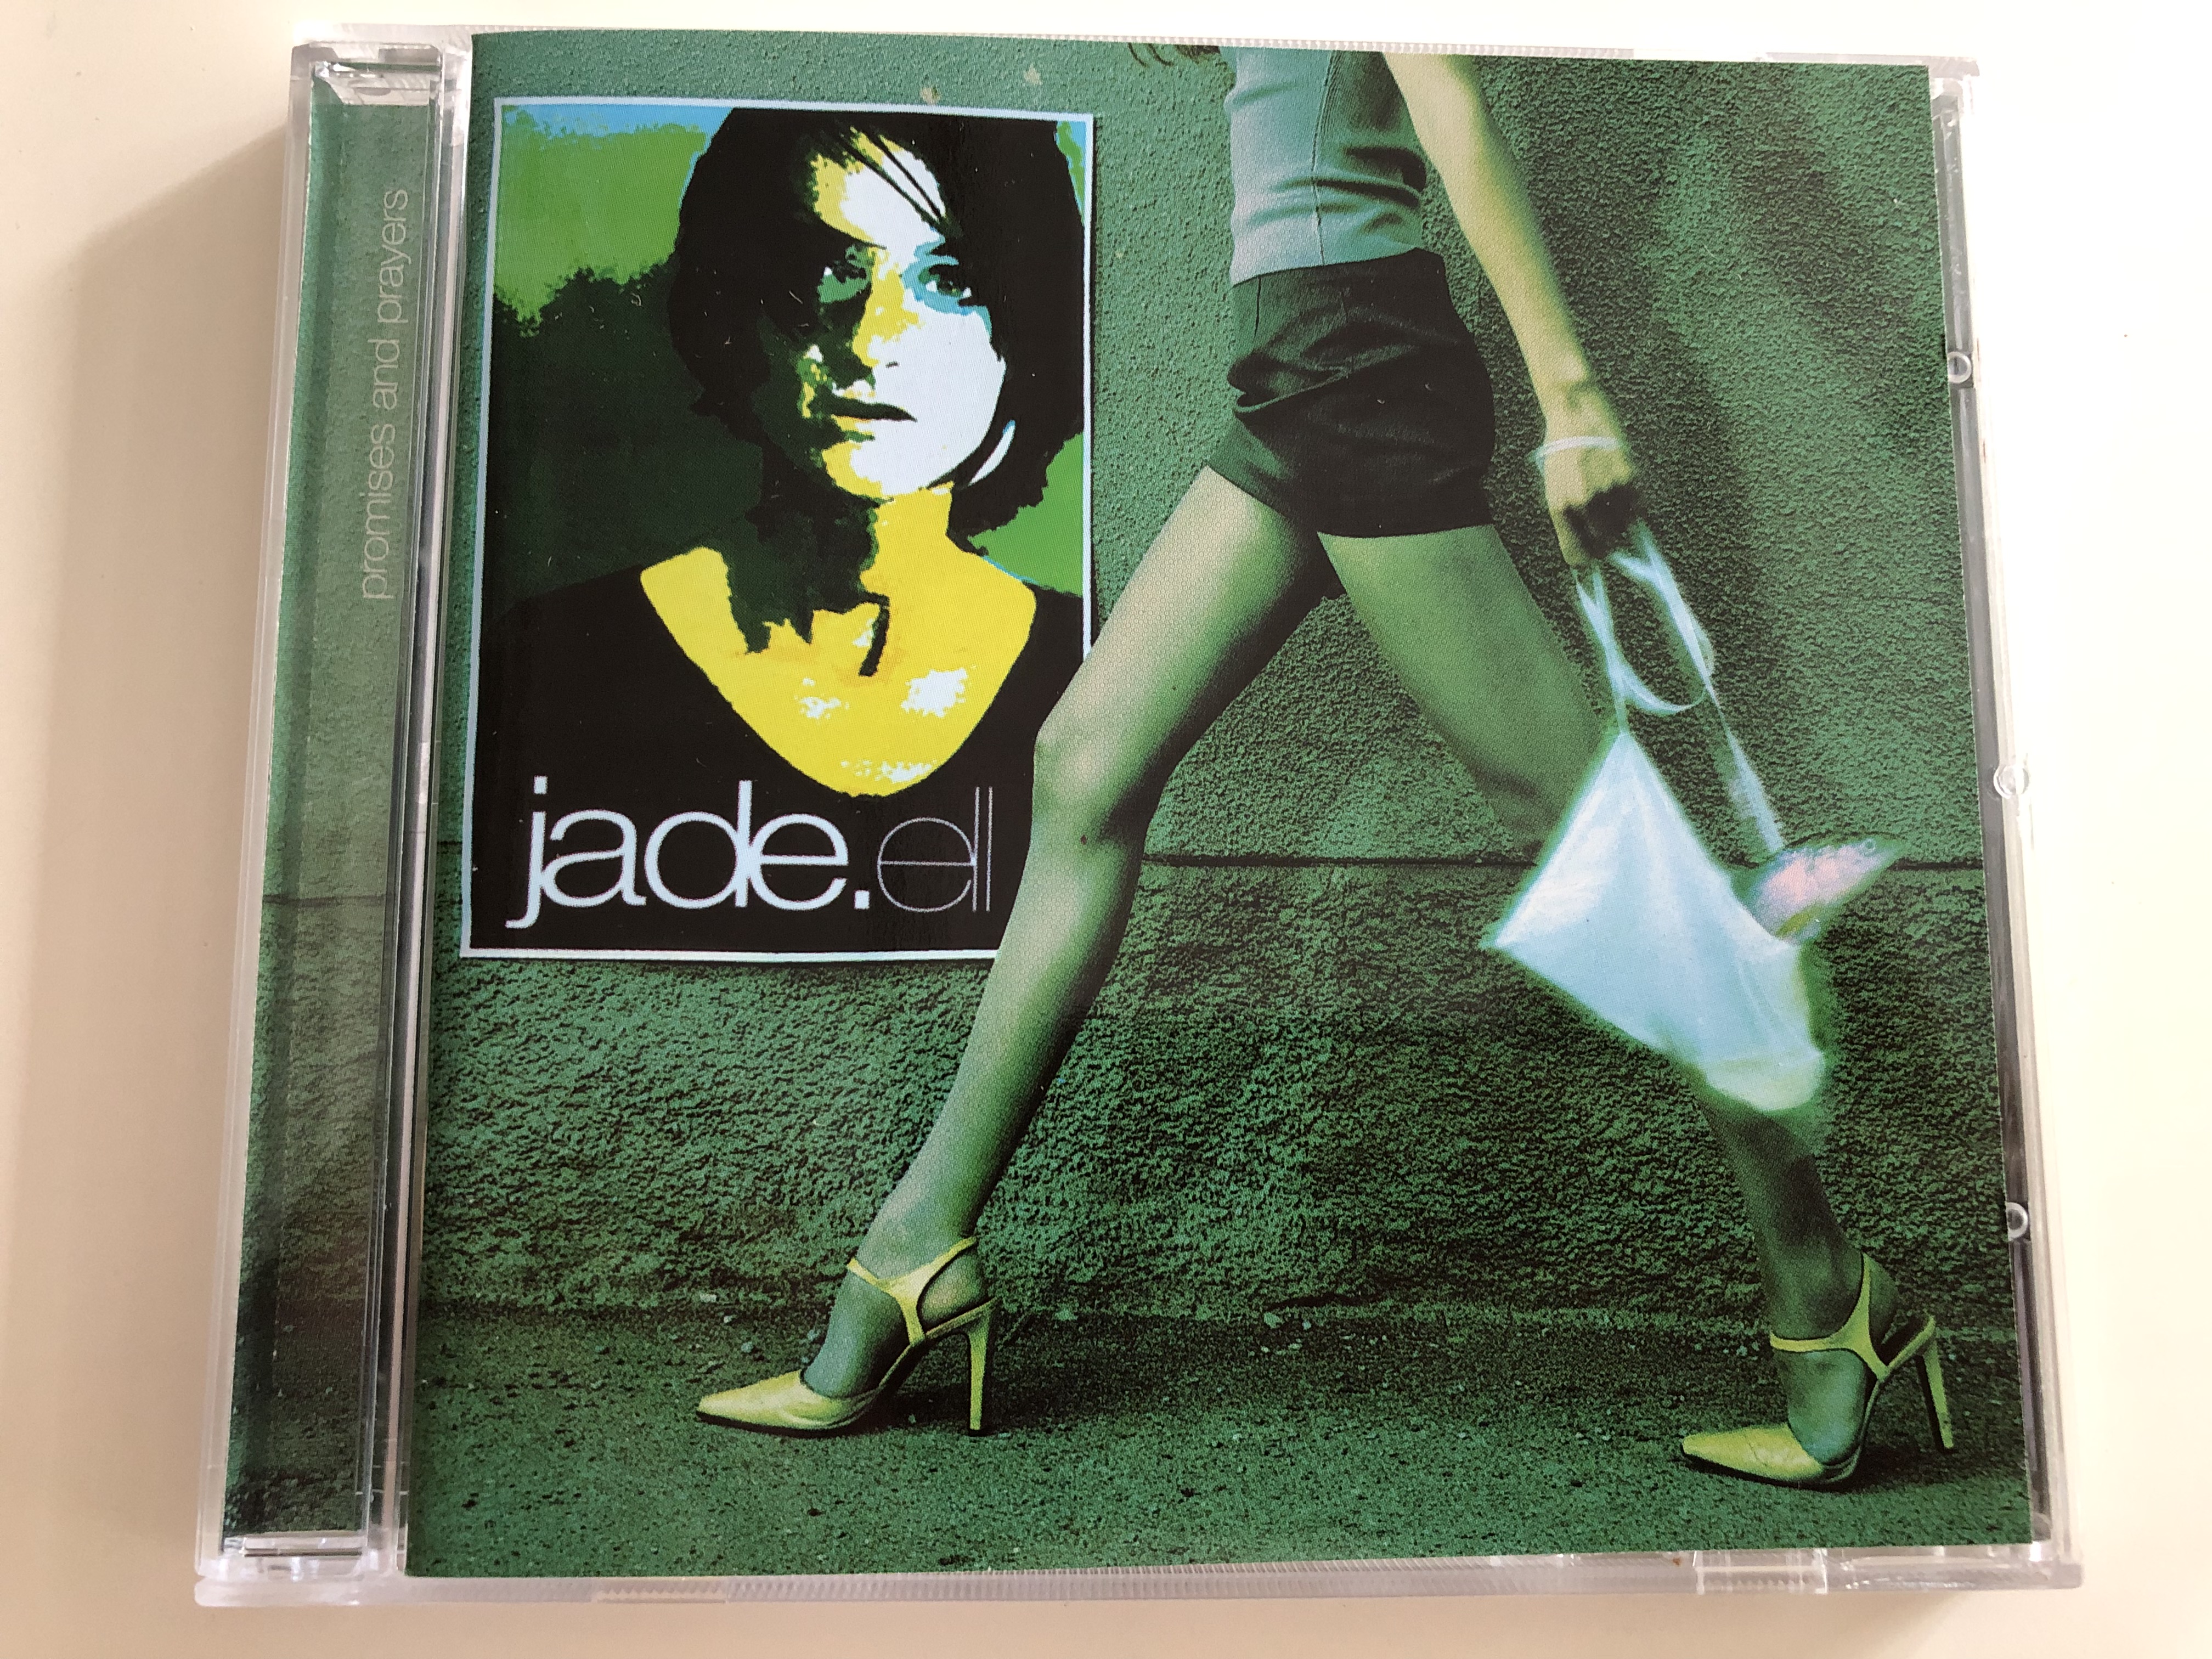 jade.ell-promises-and-prayers-make-believe-leave-someone-reliable-getting-too-good-audio-cd-1998-39322ere-1-.jpg